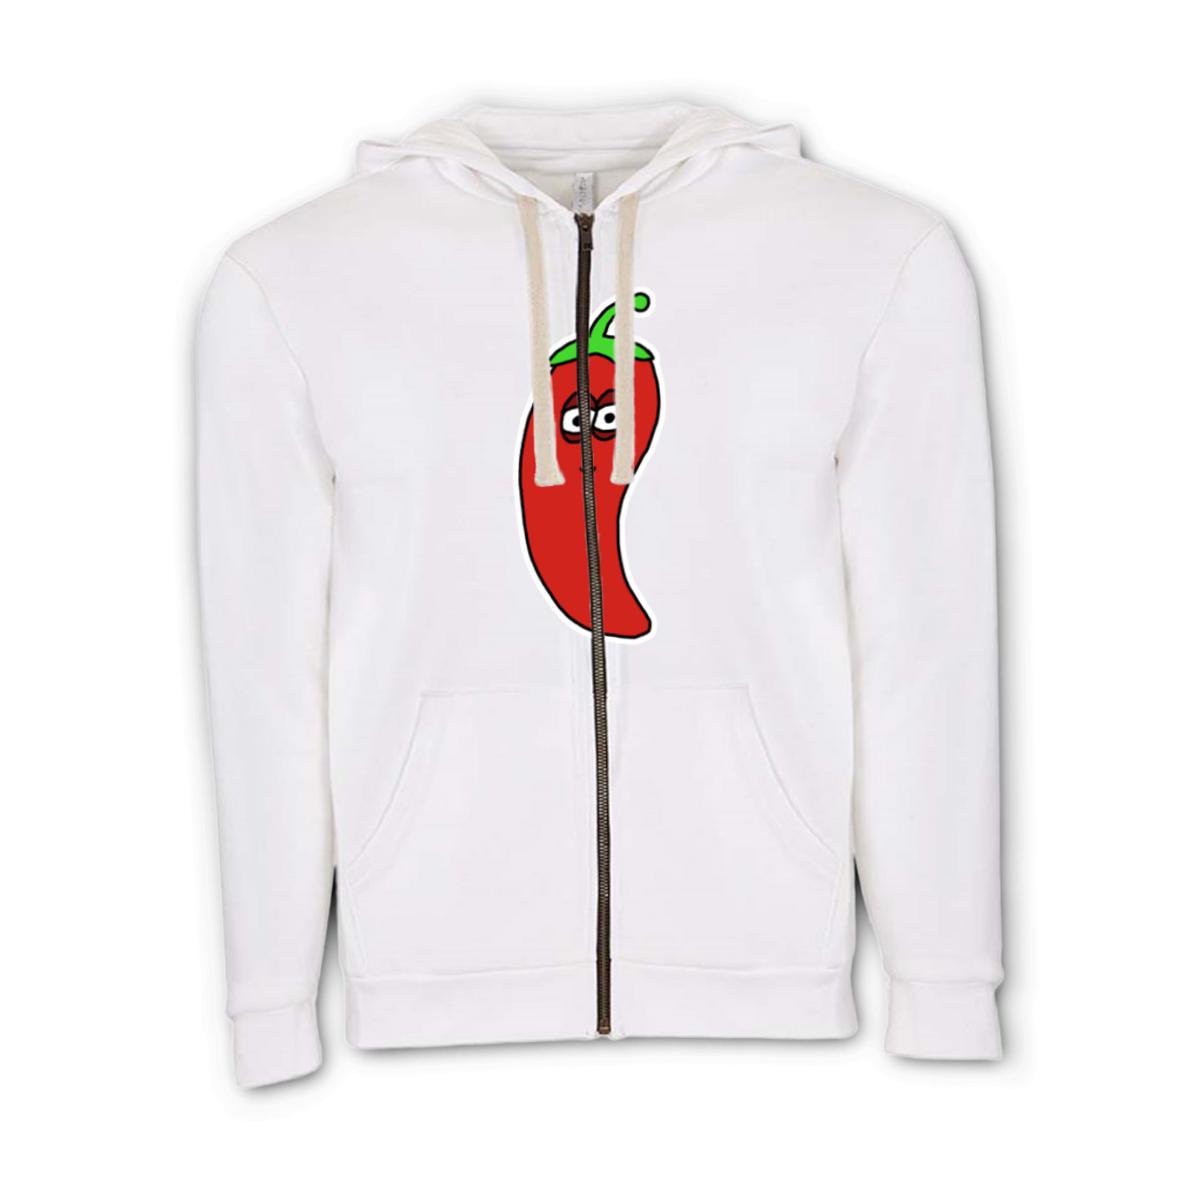 Chili Pepper Unisex Zip Hoodie Double Extra Large white